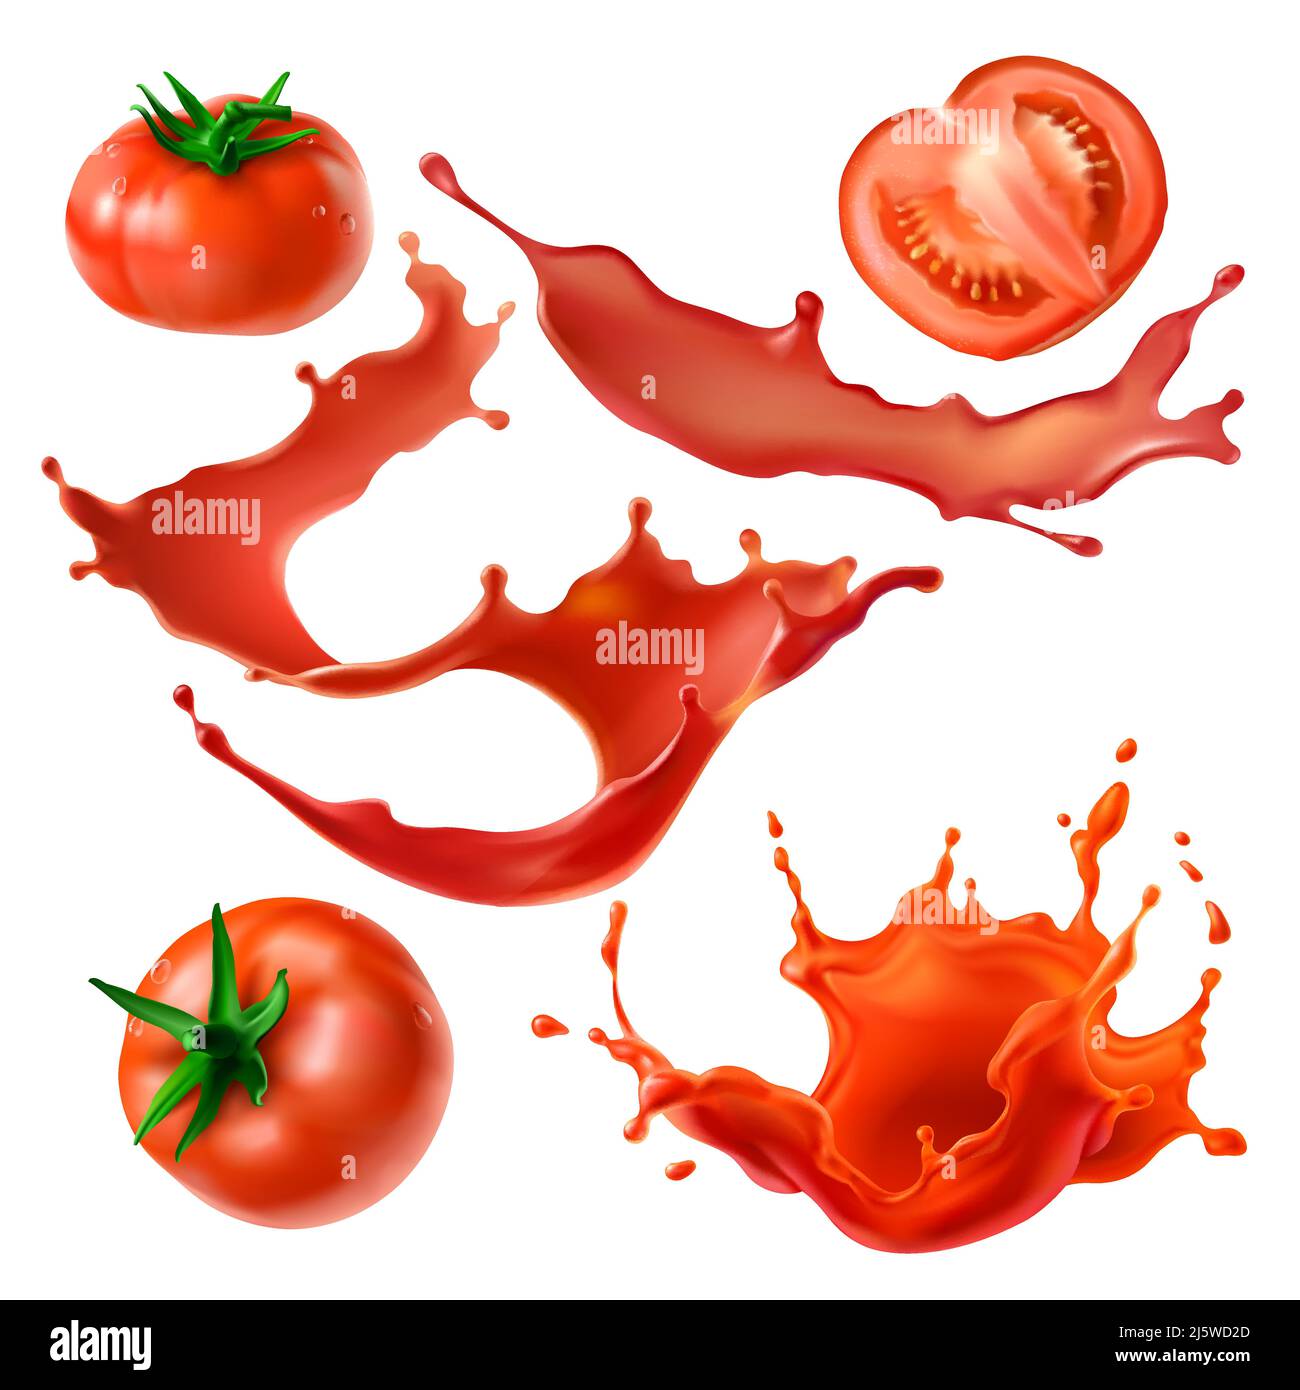 Whole and sliced on half fresh tomatoes, tomato juice splashes and swirls 3d realistic vector illustrations set isolated on white background. Organic Stock Vector